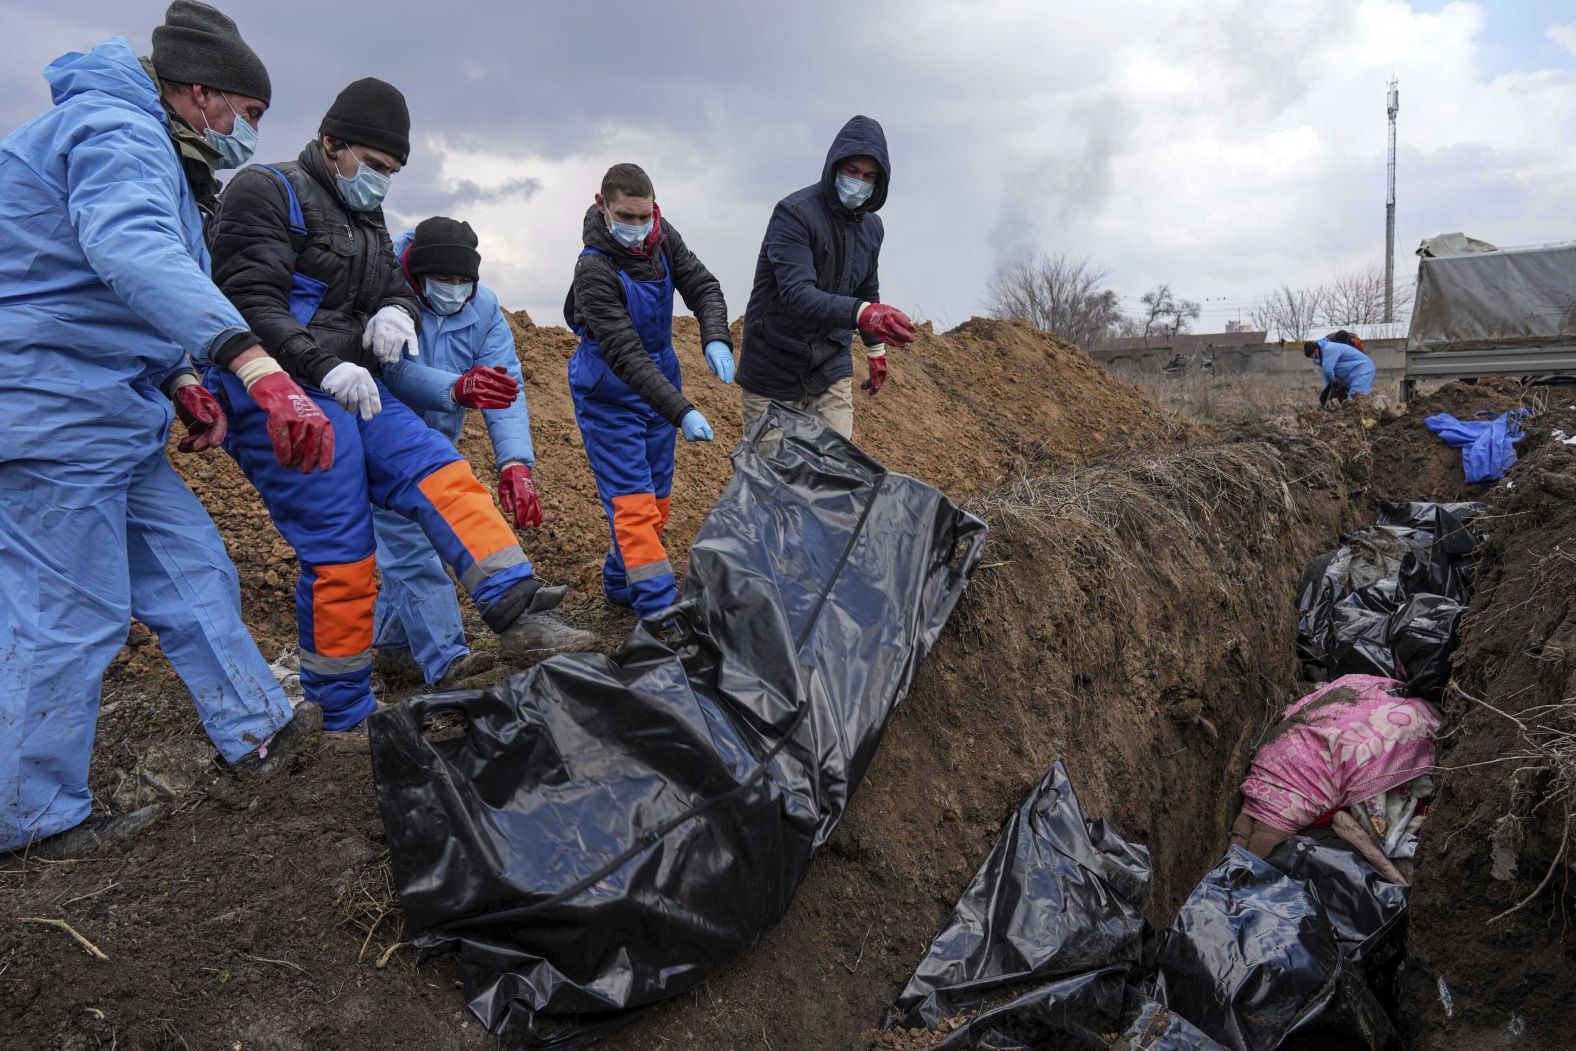 Dead bodies are placed into a mass grave on the outskirts of Mariupol on March 9. With overflowing morgues and repeated shelling, the city has been <a href="index.php?page=&url=https%3A%2F%2Fapnews.com%2Farticle%2Frussia-ukraine-mariupol-mass-grave-af9477cd69d067c34e0e336c05d765cc" target="_blank" target="_blank">unable to hold proper burials.</a>